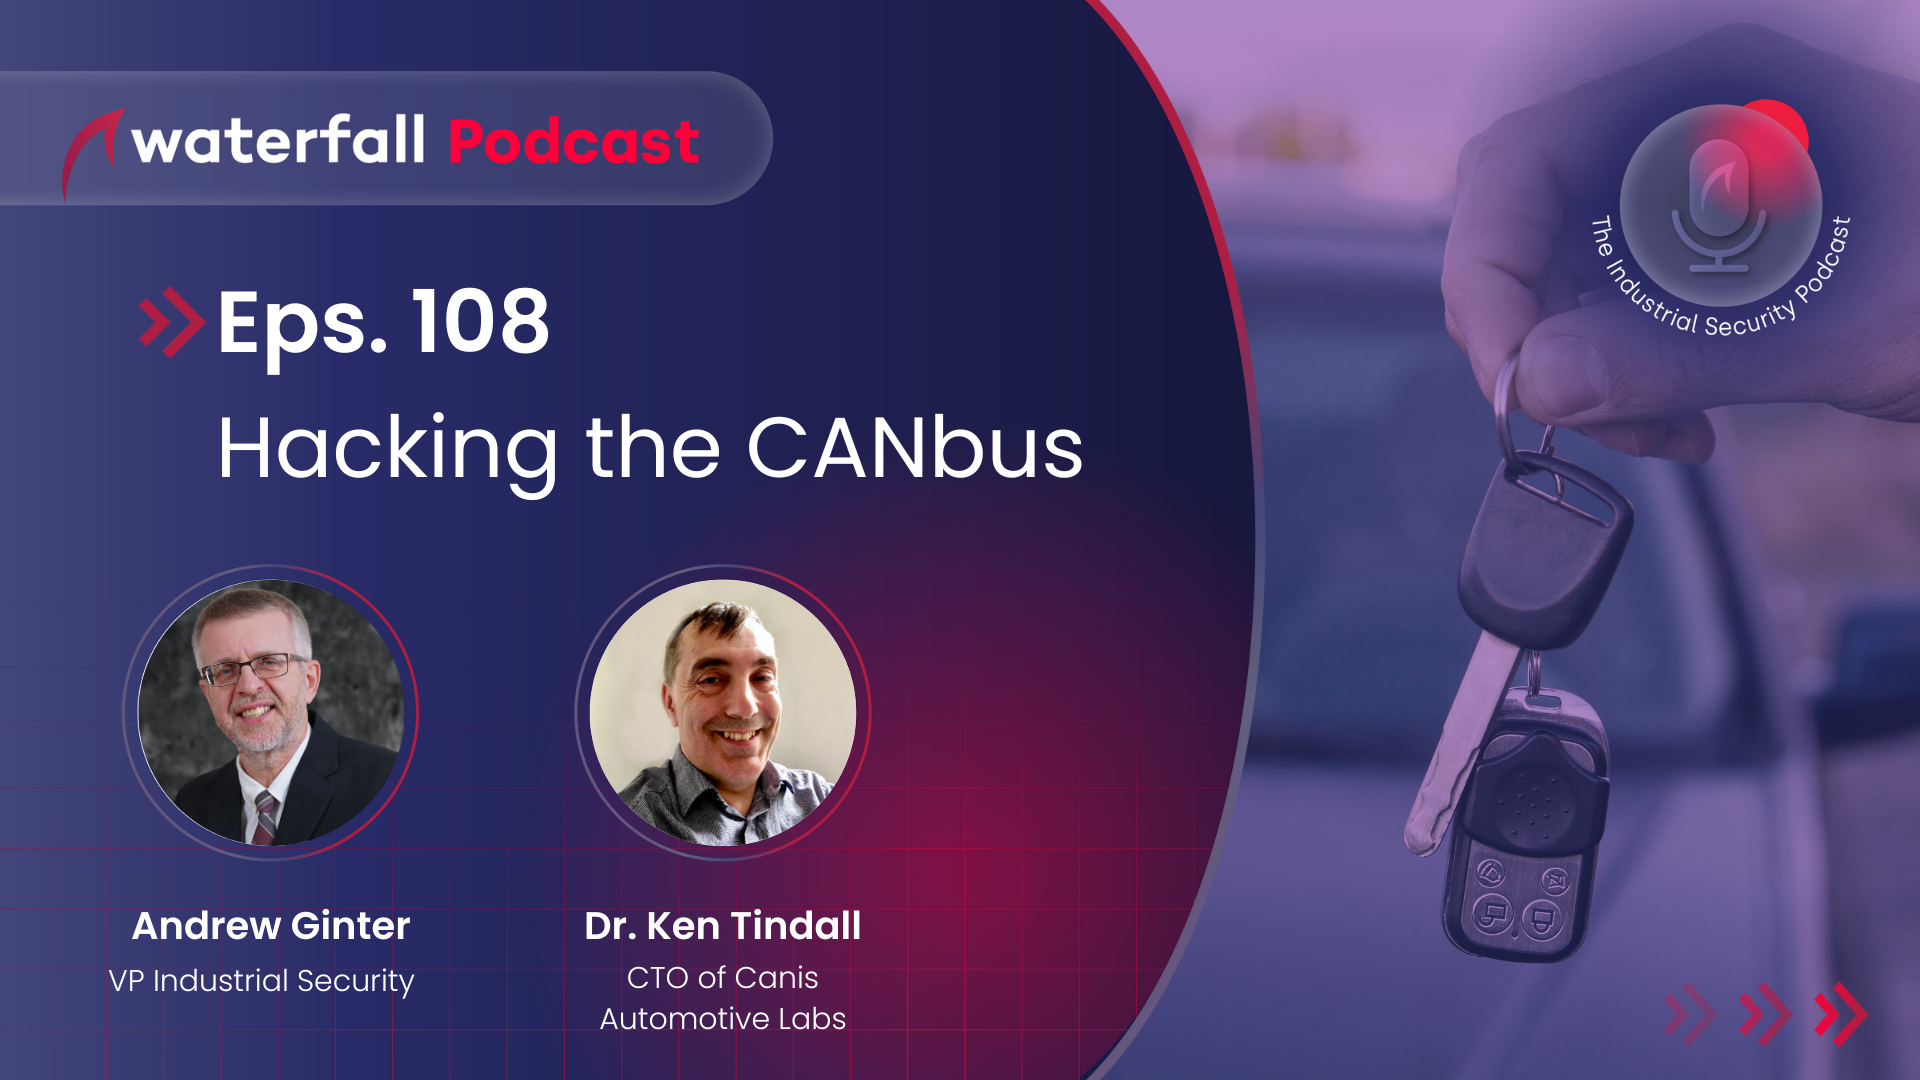 Hacking the Canbus, with Dr Ken Tindell